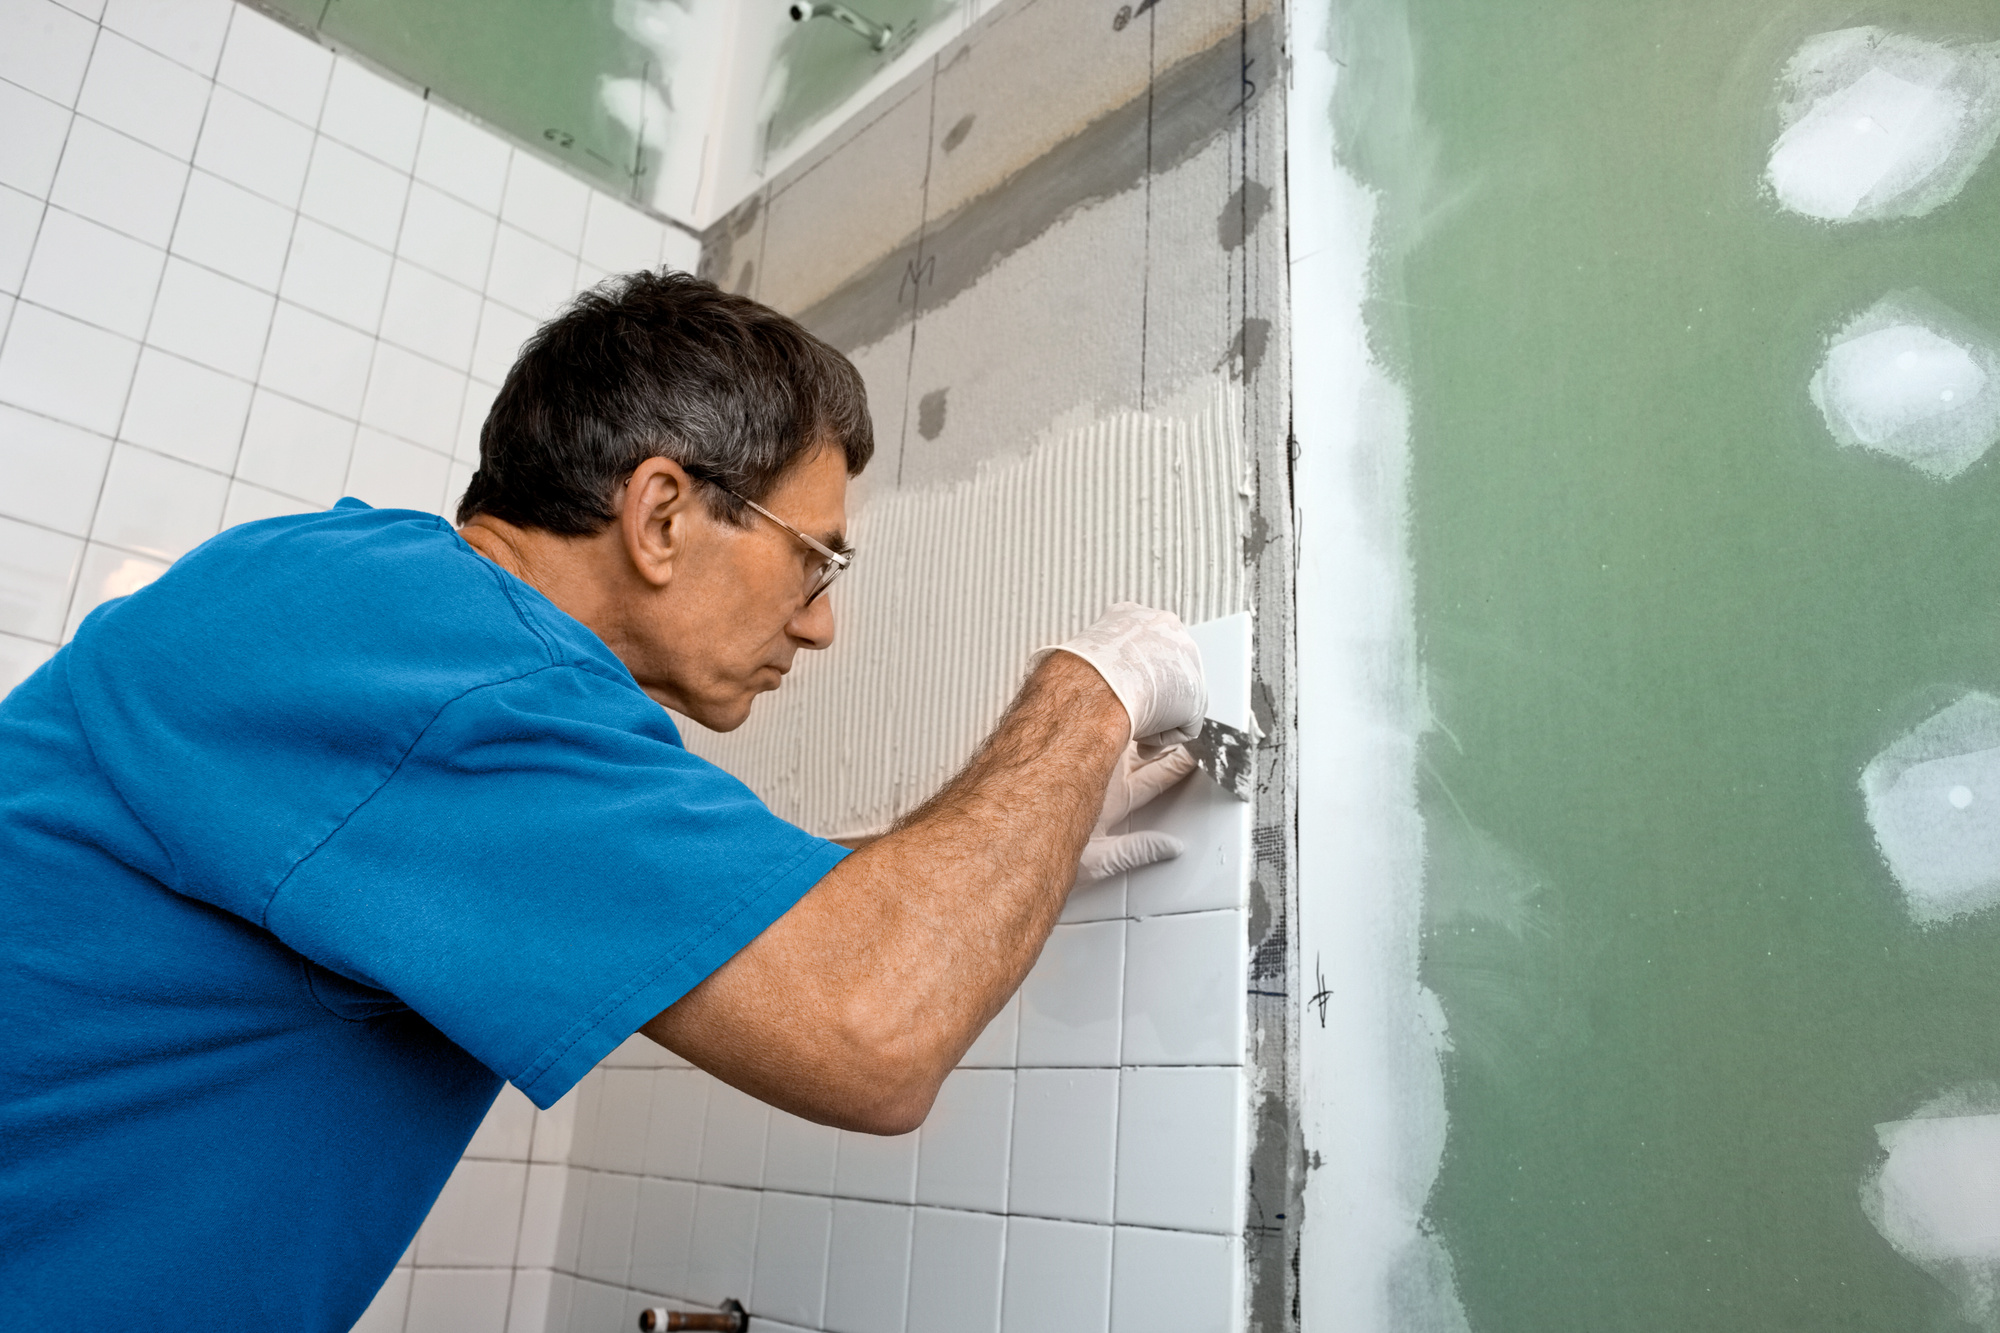 What to Look for When Hiring Professional Bathroom Remodeling Contractors